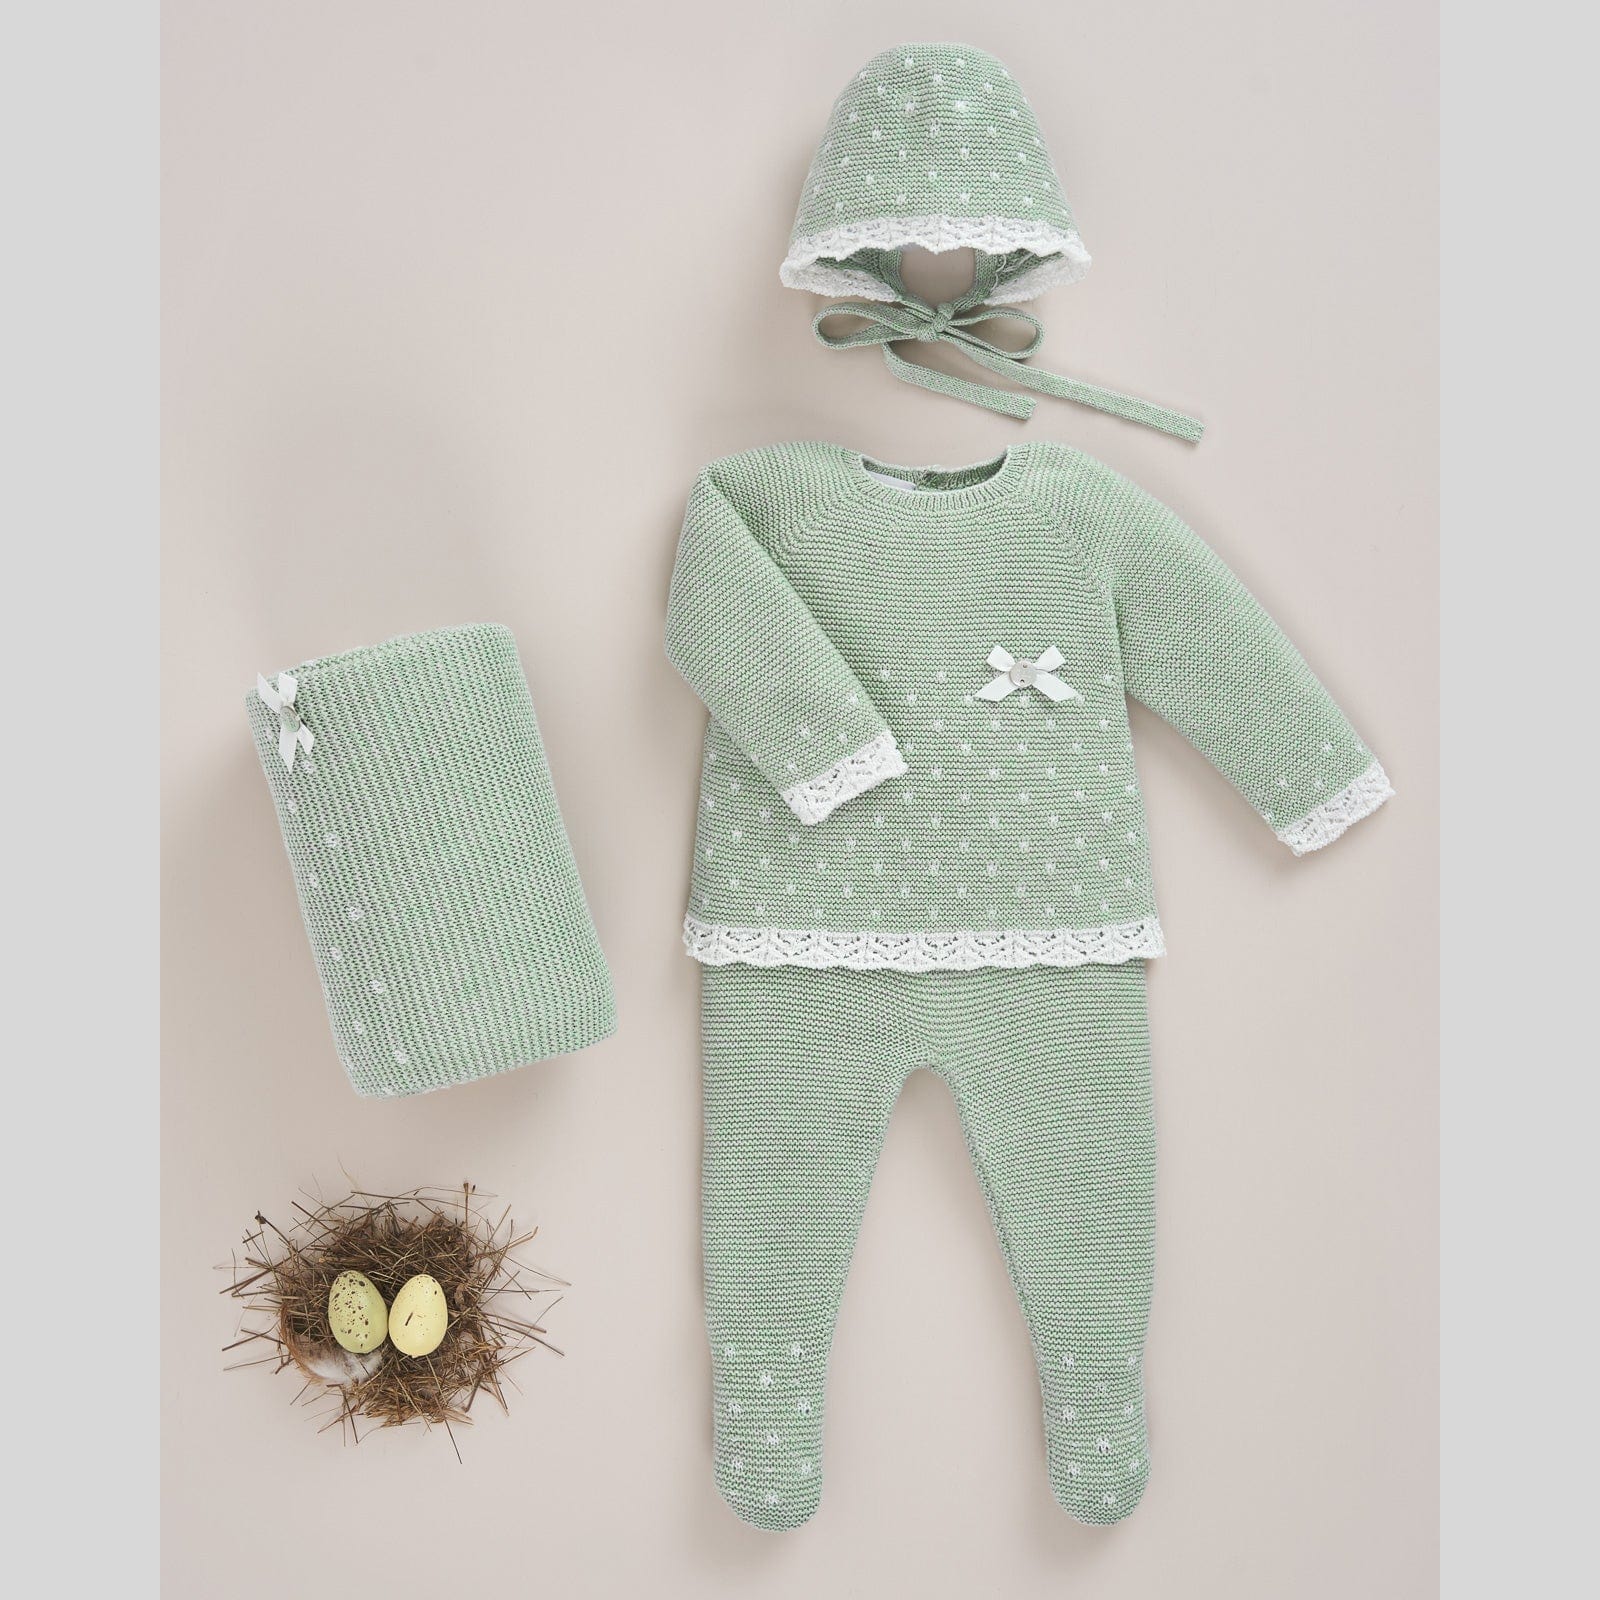 Paz Rodriguez Paz Rodriguez Green Knitted Outfit with Bonnet